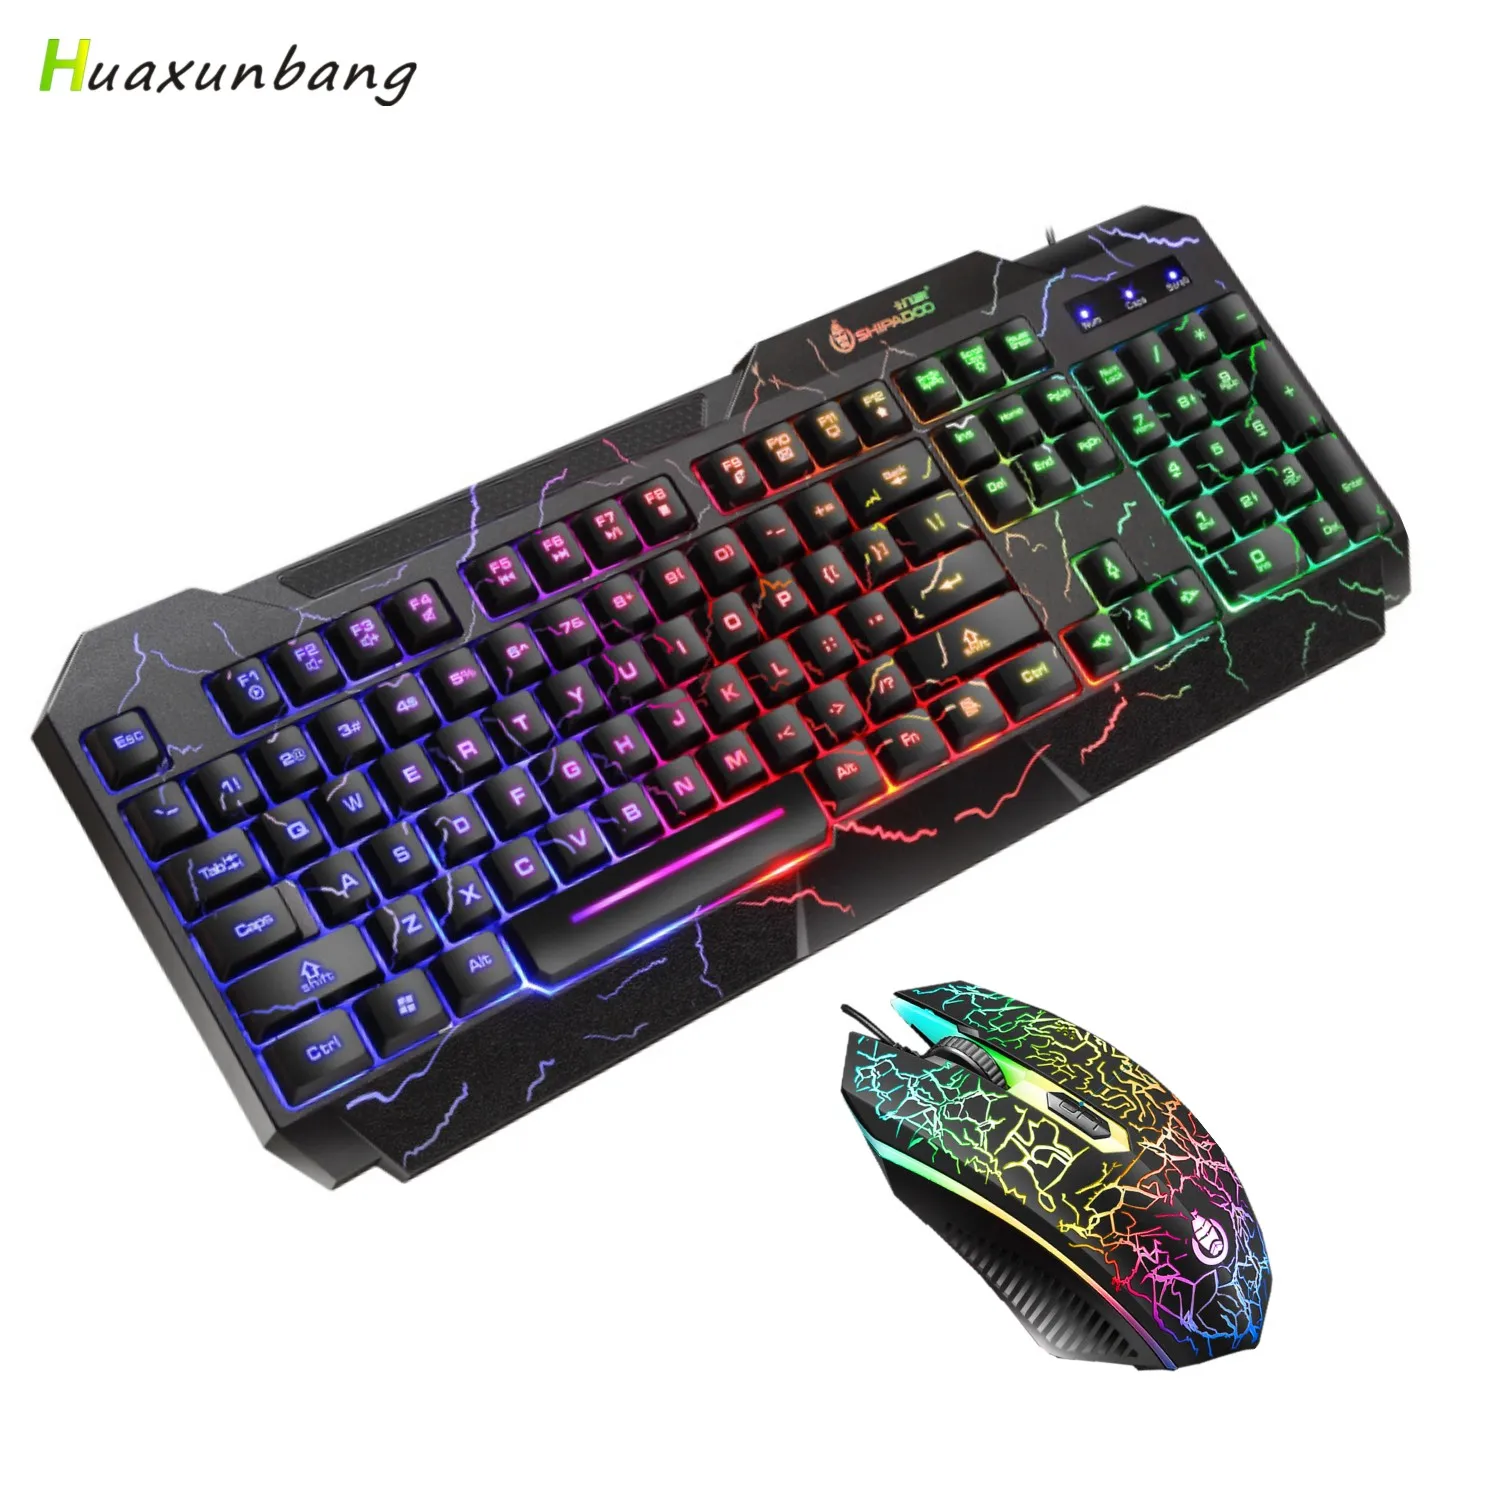 

Gaming Keyboard Mouse Combo USB Wired Luminous Keybord Gamer Kit Waterproof MultiMedia LED RGB Backlit Keyboard And Mouse For PC